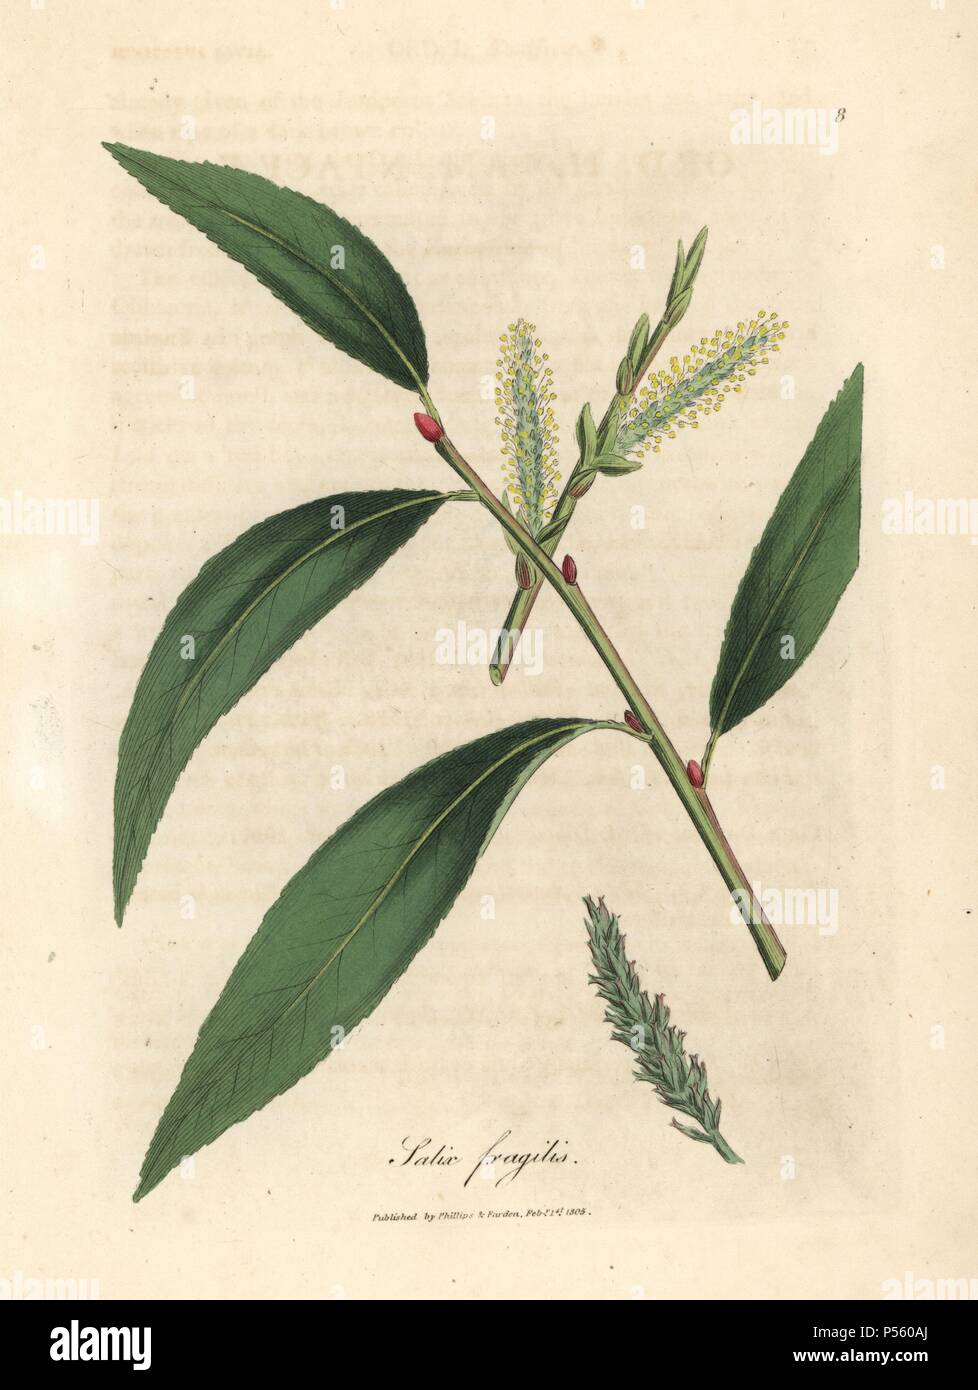 Leaves and catkins of the crack willow tree, Salix fragilis. Handcolored copperplate engraving from a botanical illustration by James Sowerby from William Woodville and Sir William Jackson Hooker's 'Medical Botany' 1832. The tireless Sowerby (1757-1822) drew over 2,500 plants for Smith's mammoth 'English Botany' (1790-1814) and 440 mushrooms for 'Coloured Figures of English Fungi ' (1797) among many other works. Stock Photo